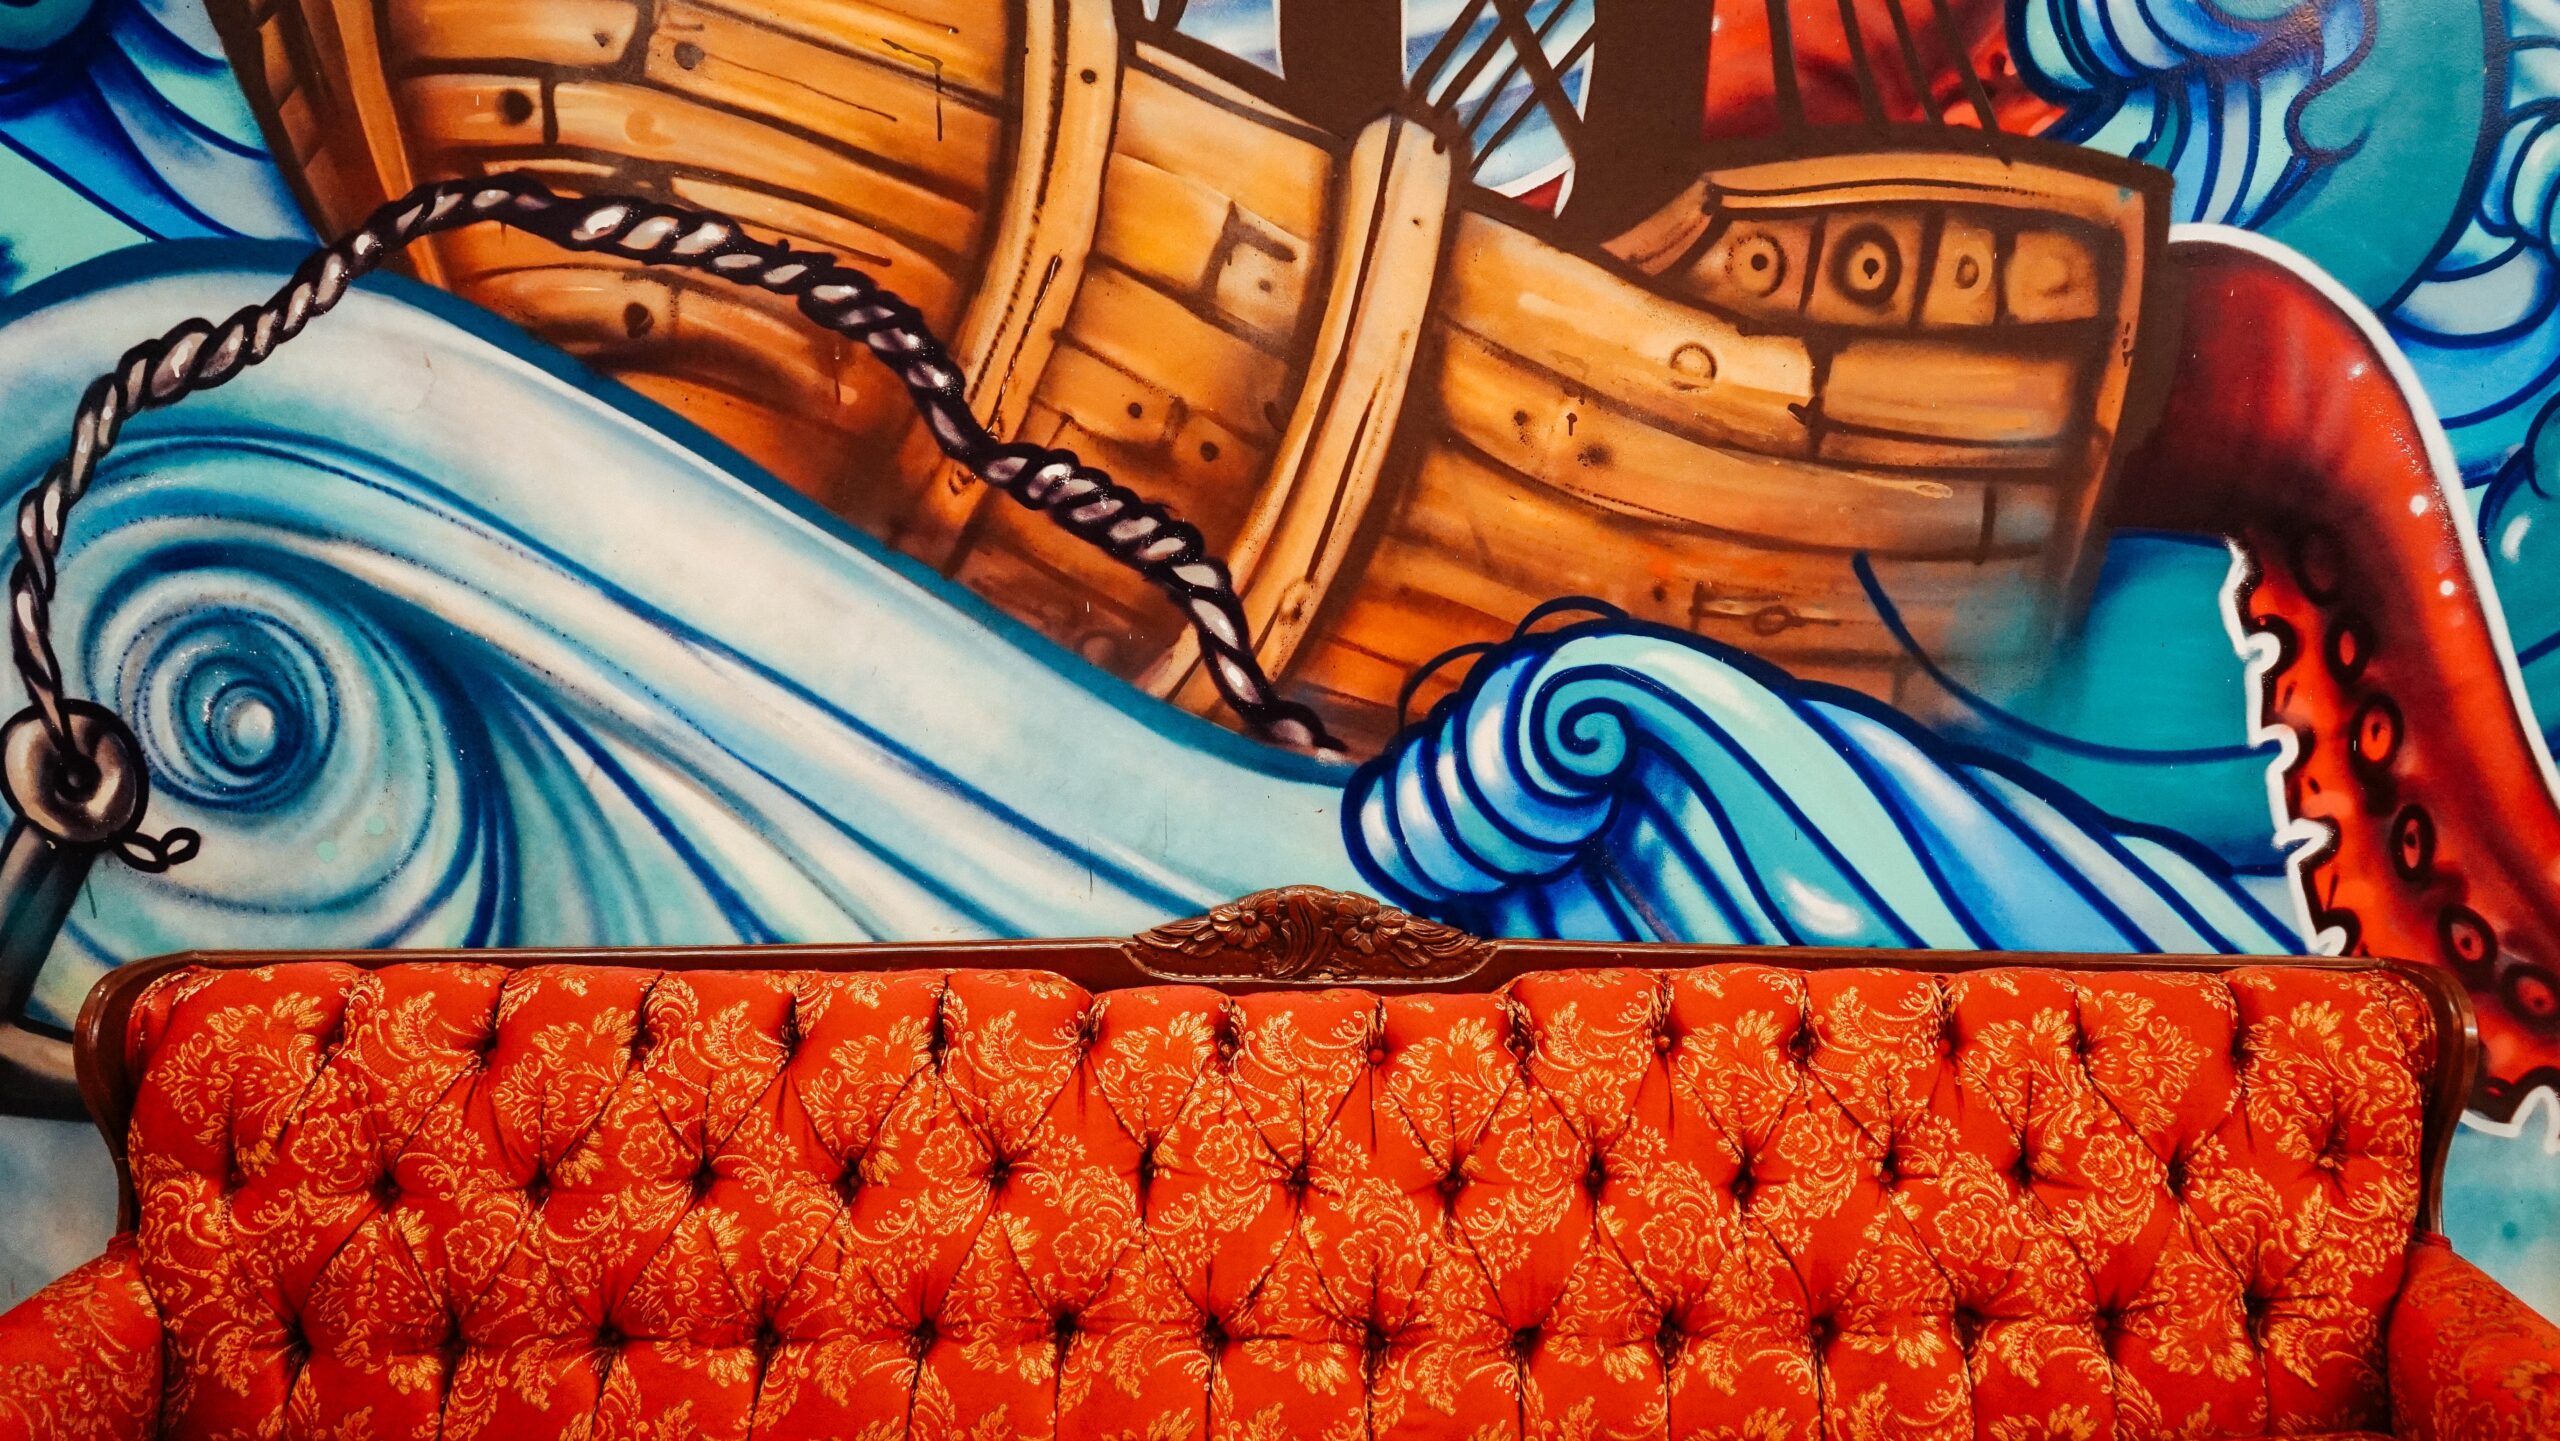 On the wall, a mural depicts a boat tossed by waves, struggling to lay anchor. In the front, a bold red couch rests comfortably, welcoming contemplation.